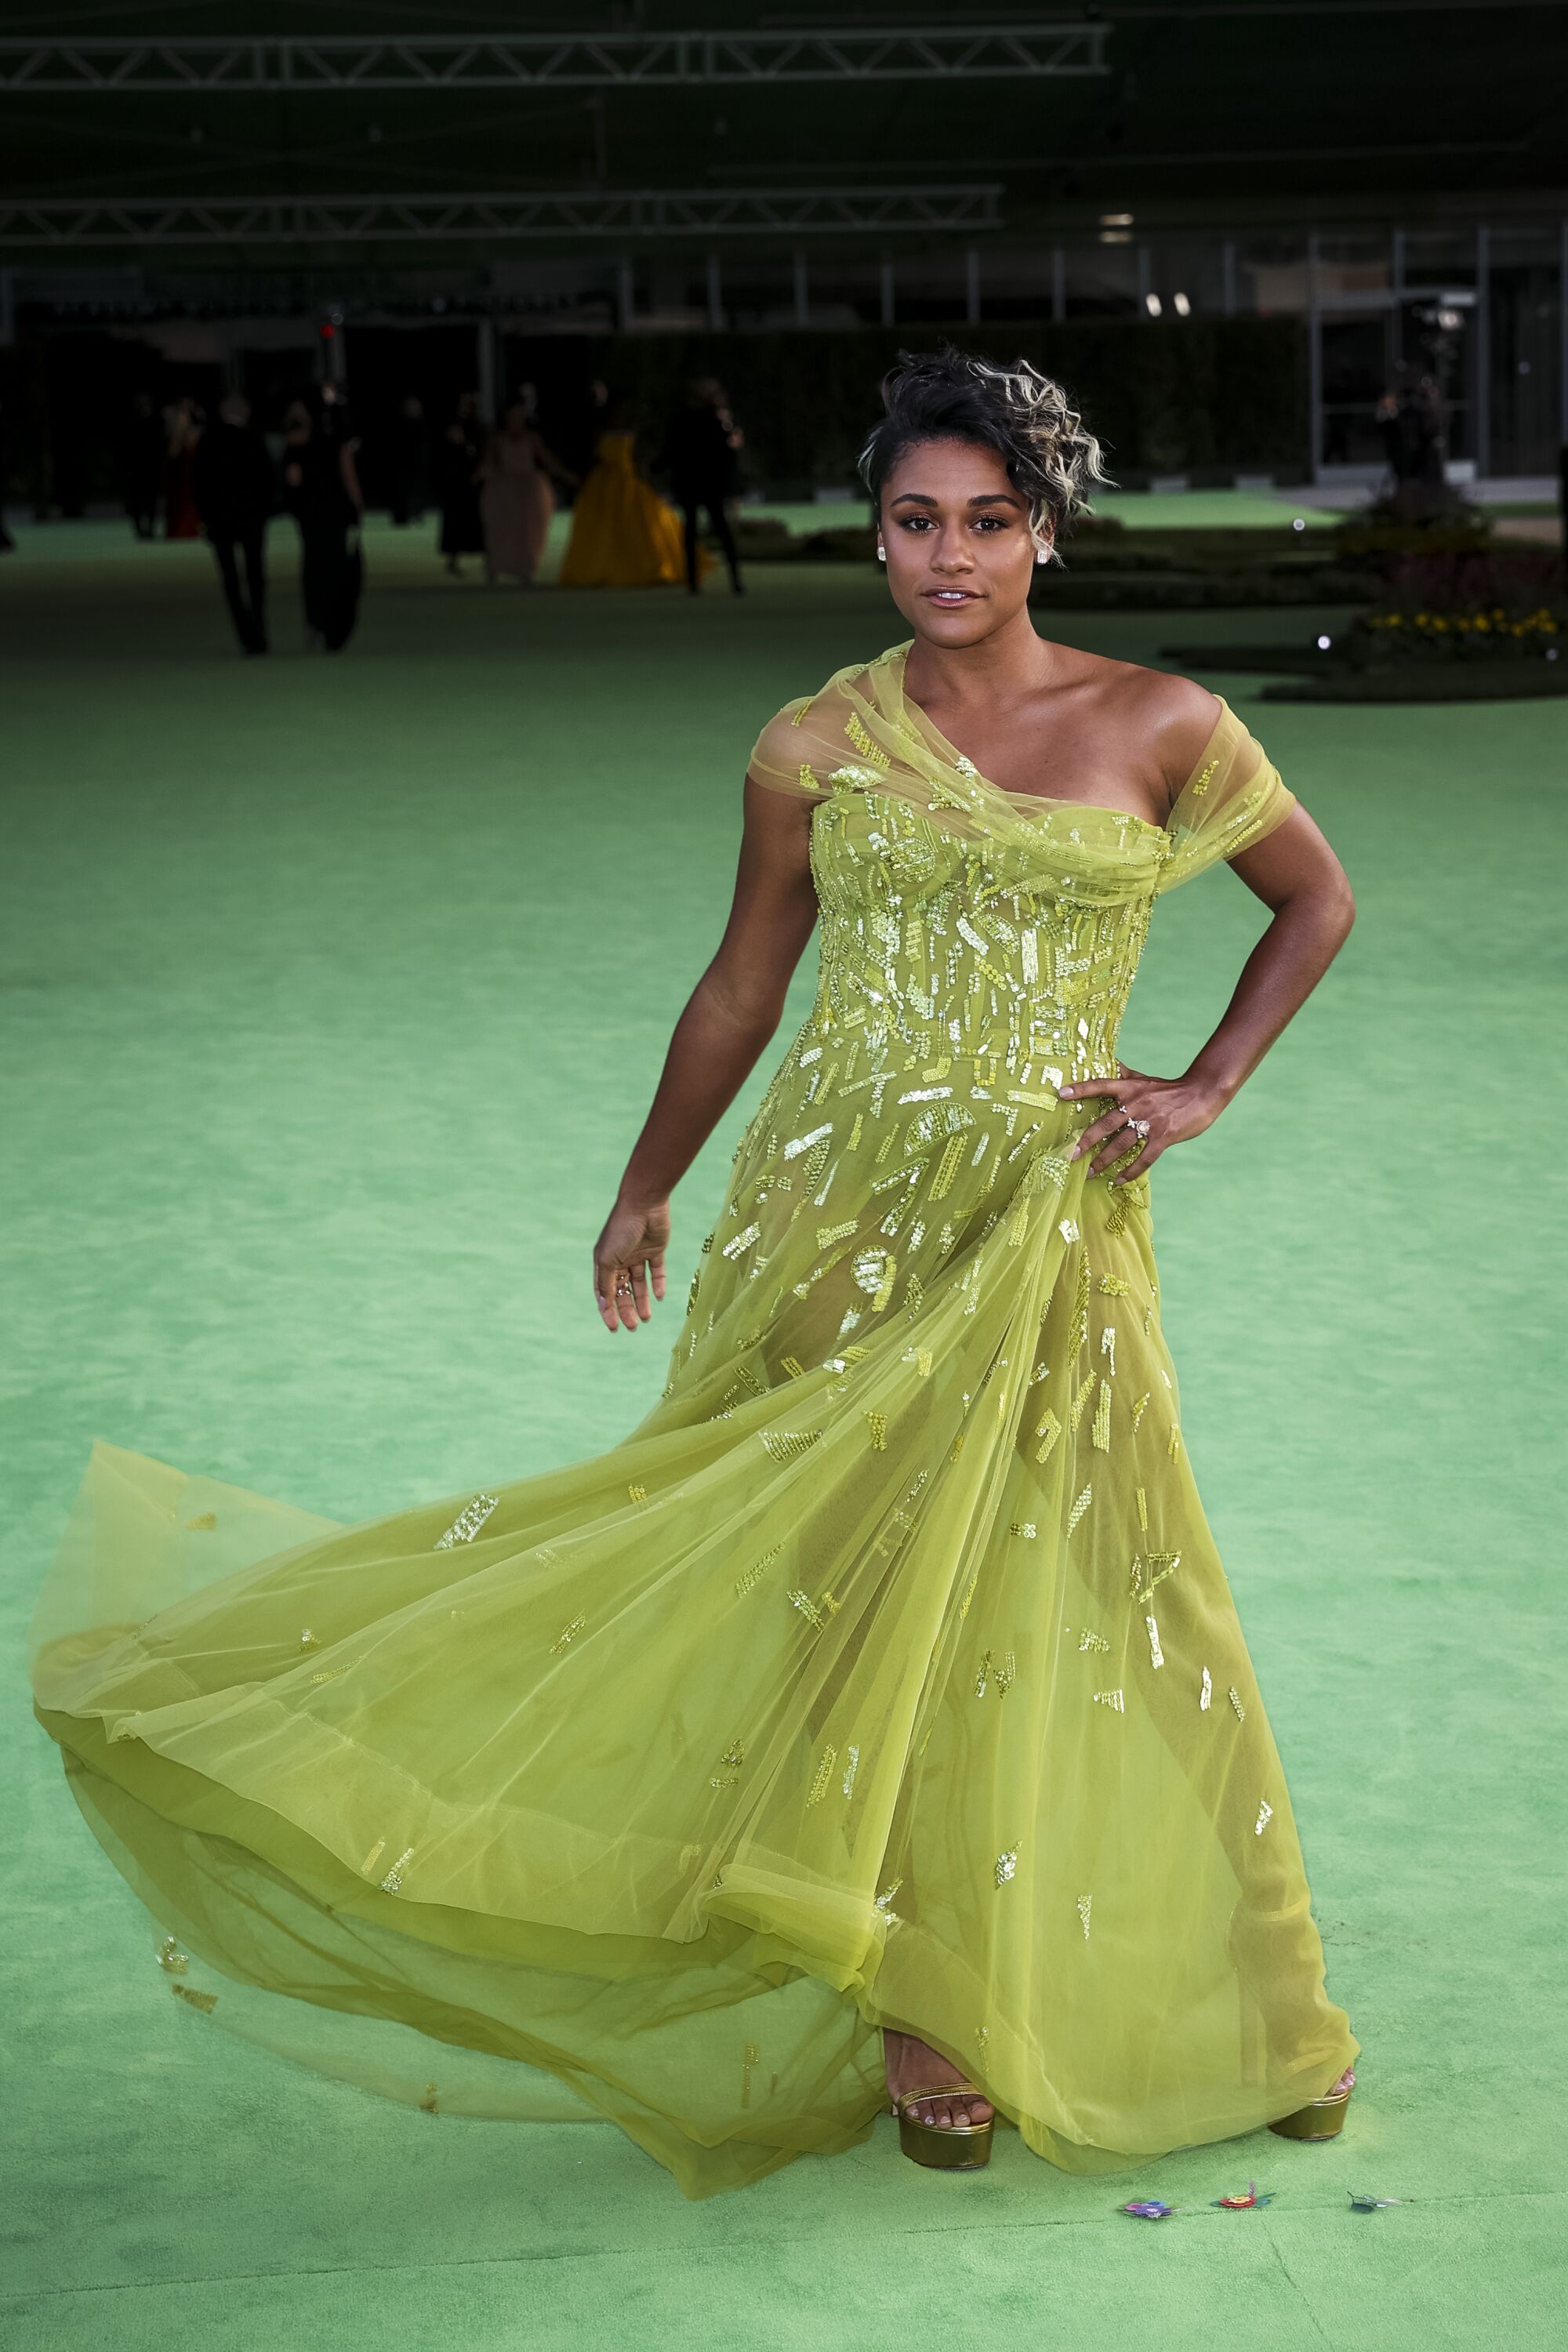 A woman in a green dress posing on a green carpet